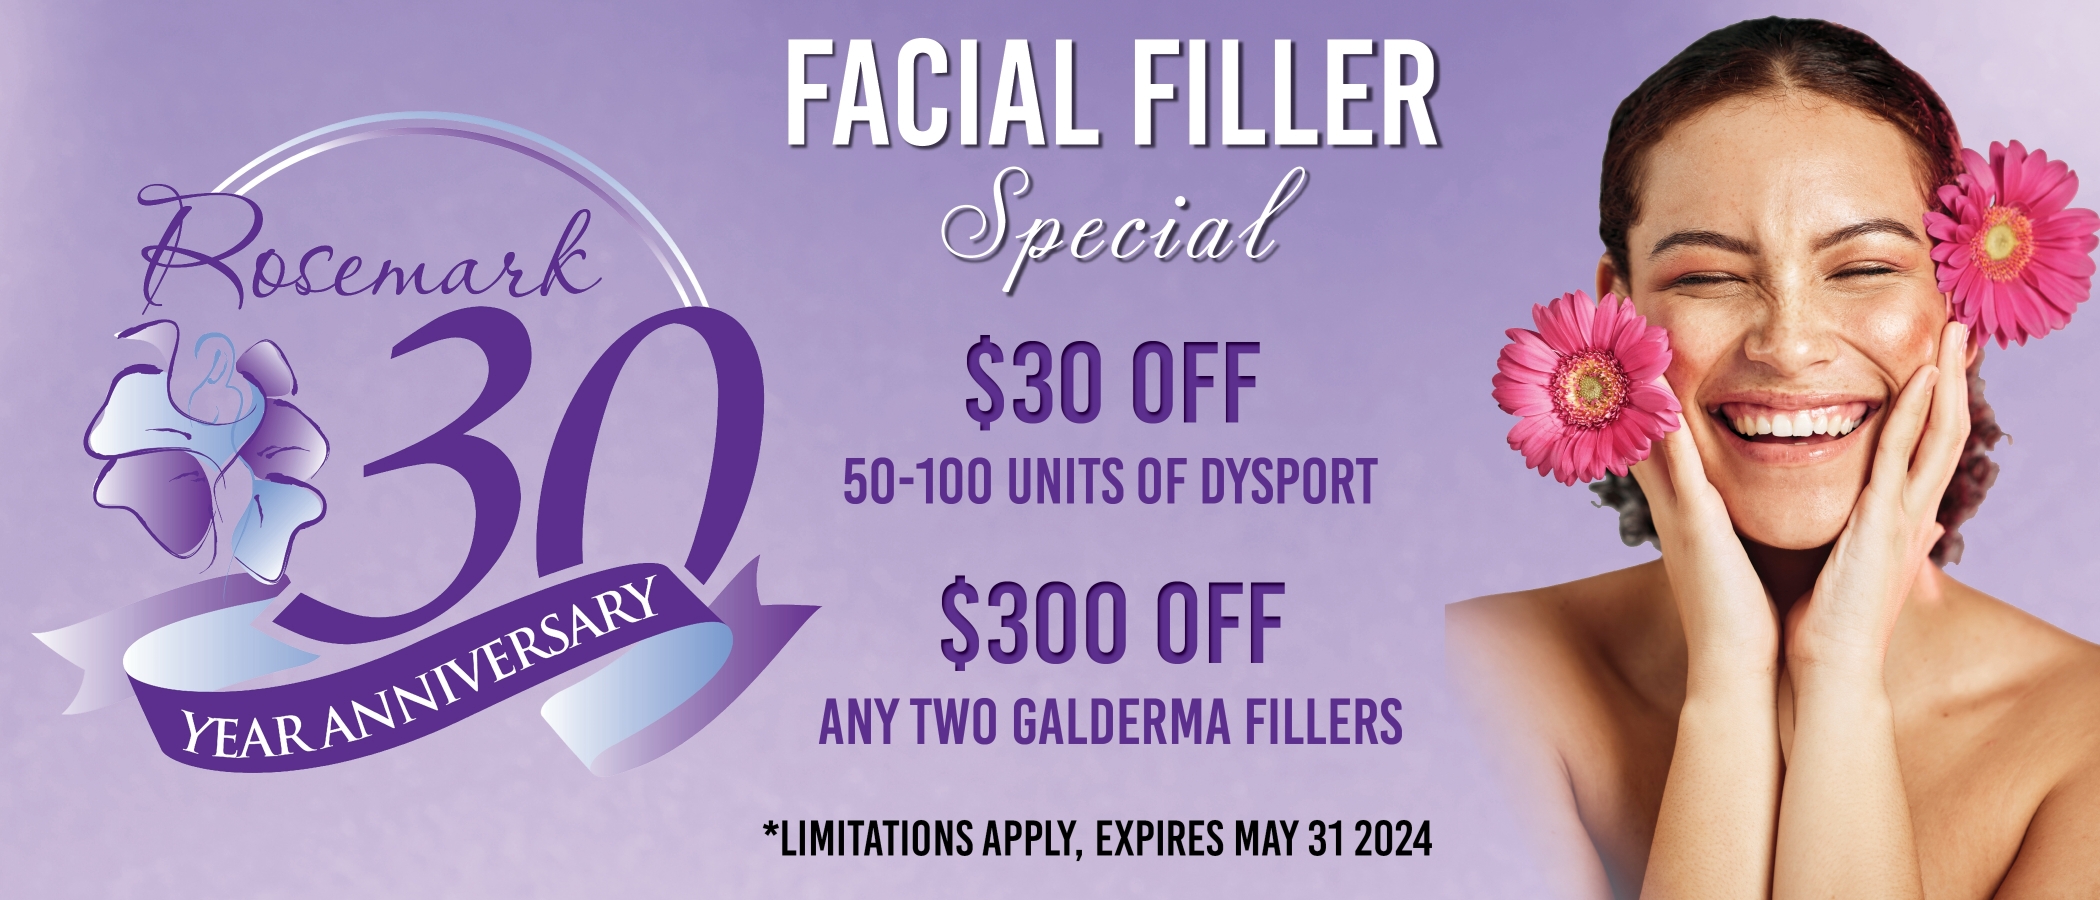 Facial filler special for 30-year anniversary.